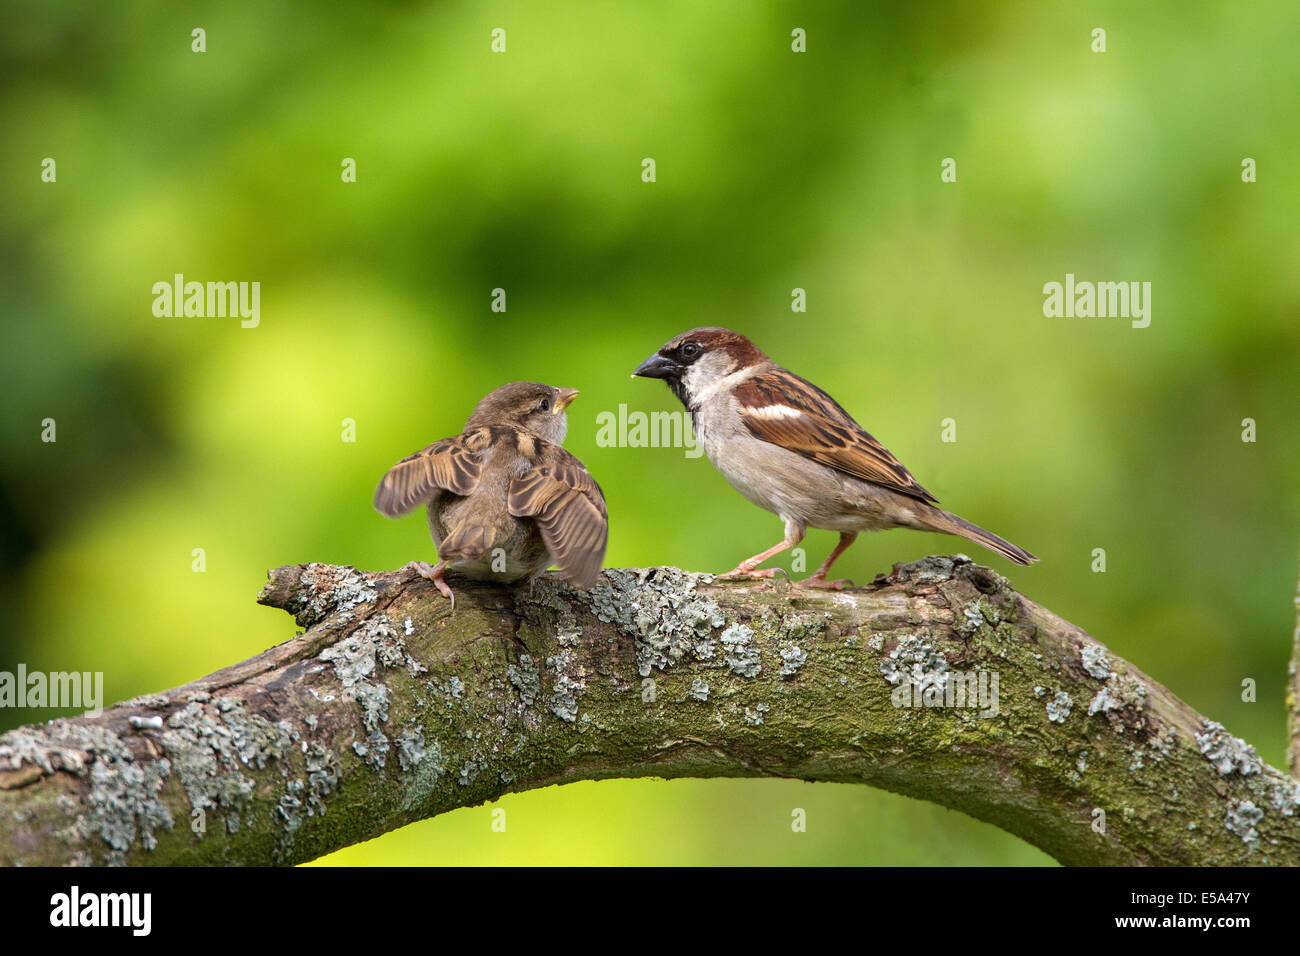 Young House Sparrow begging for food from adult Male. Stock Photo